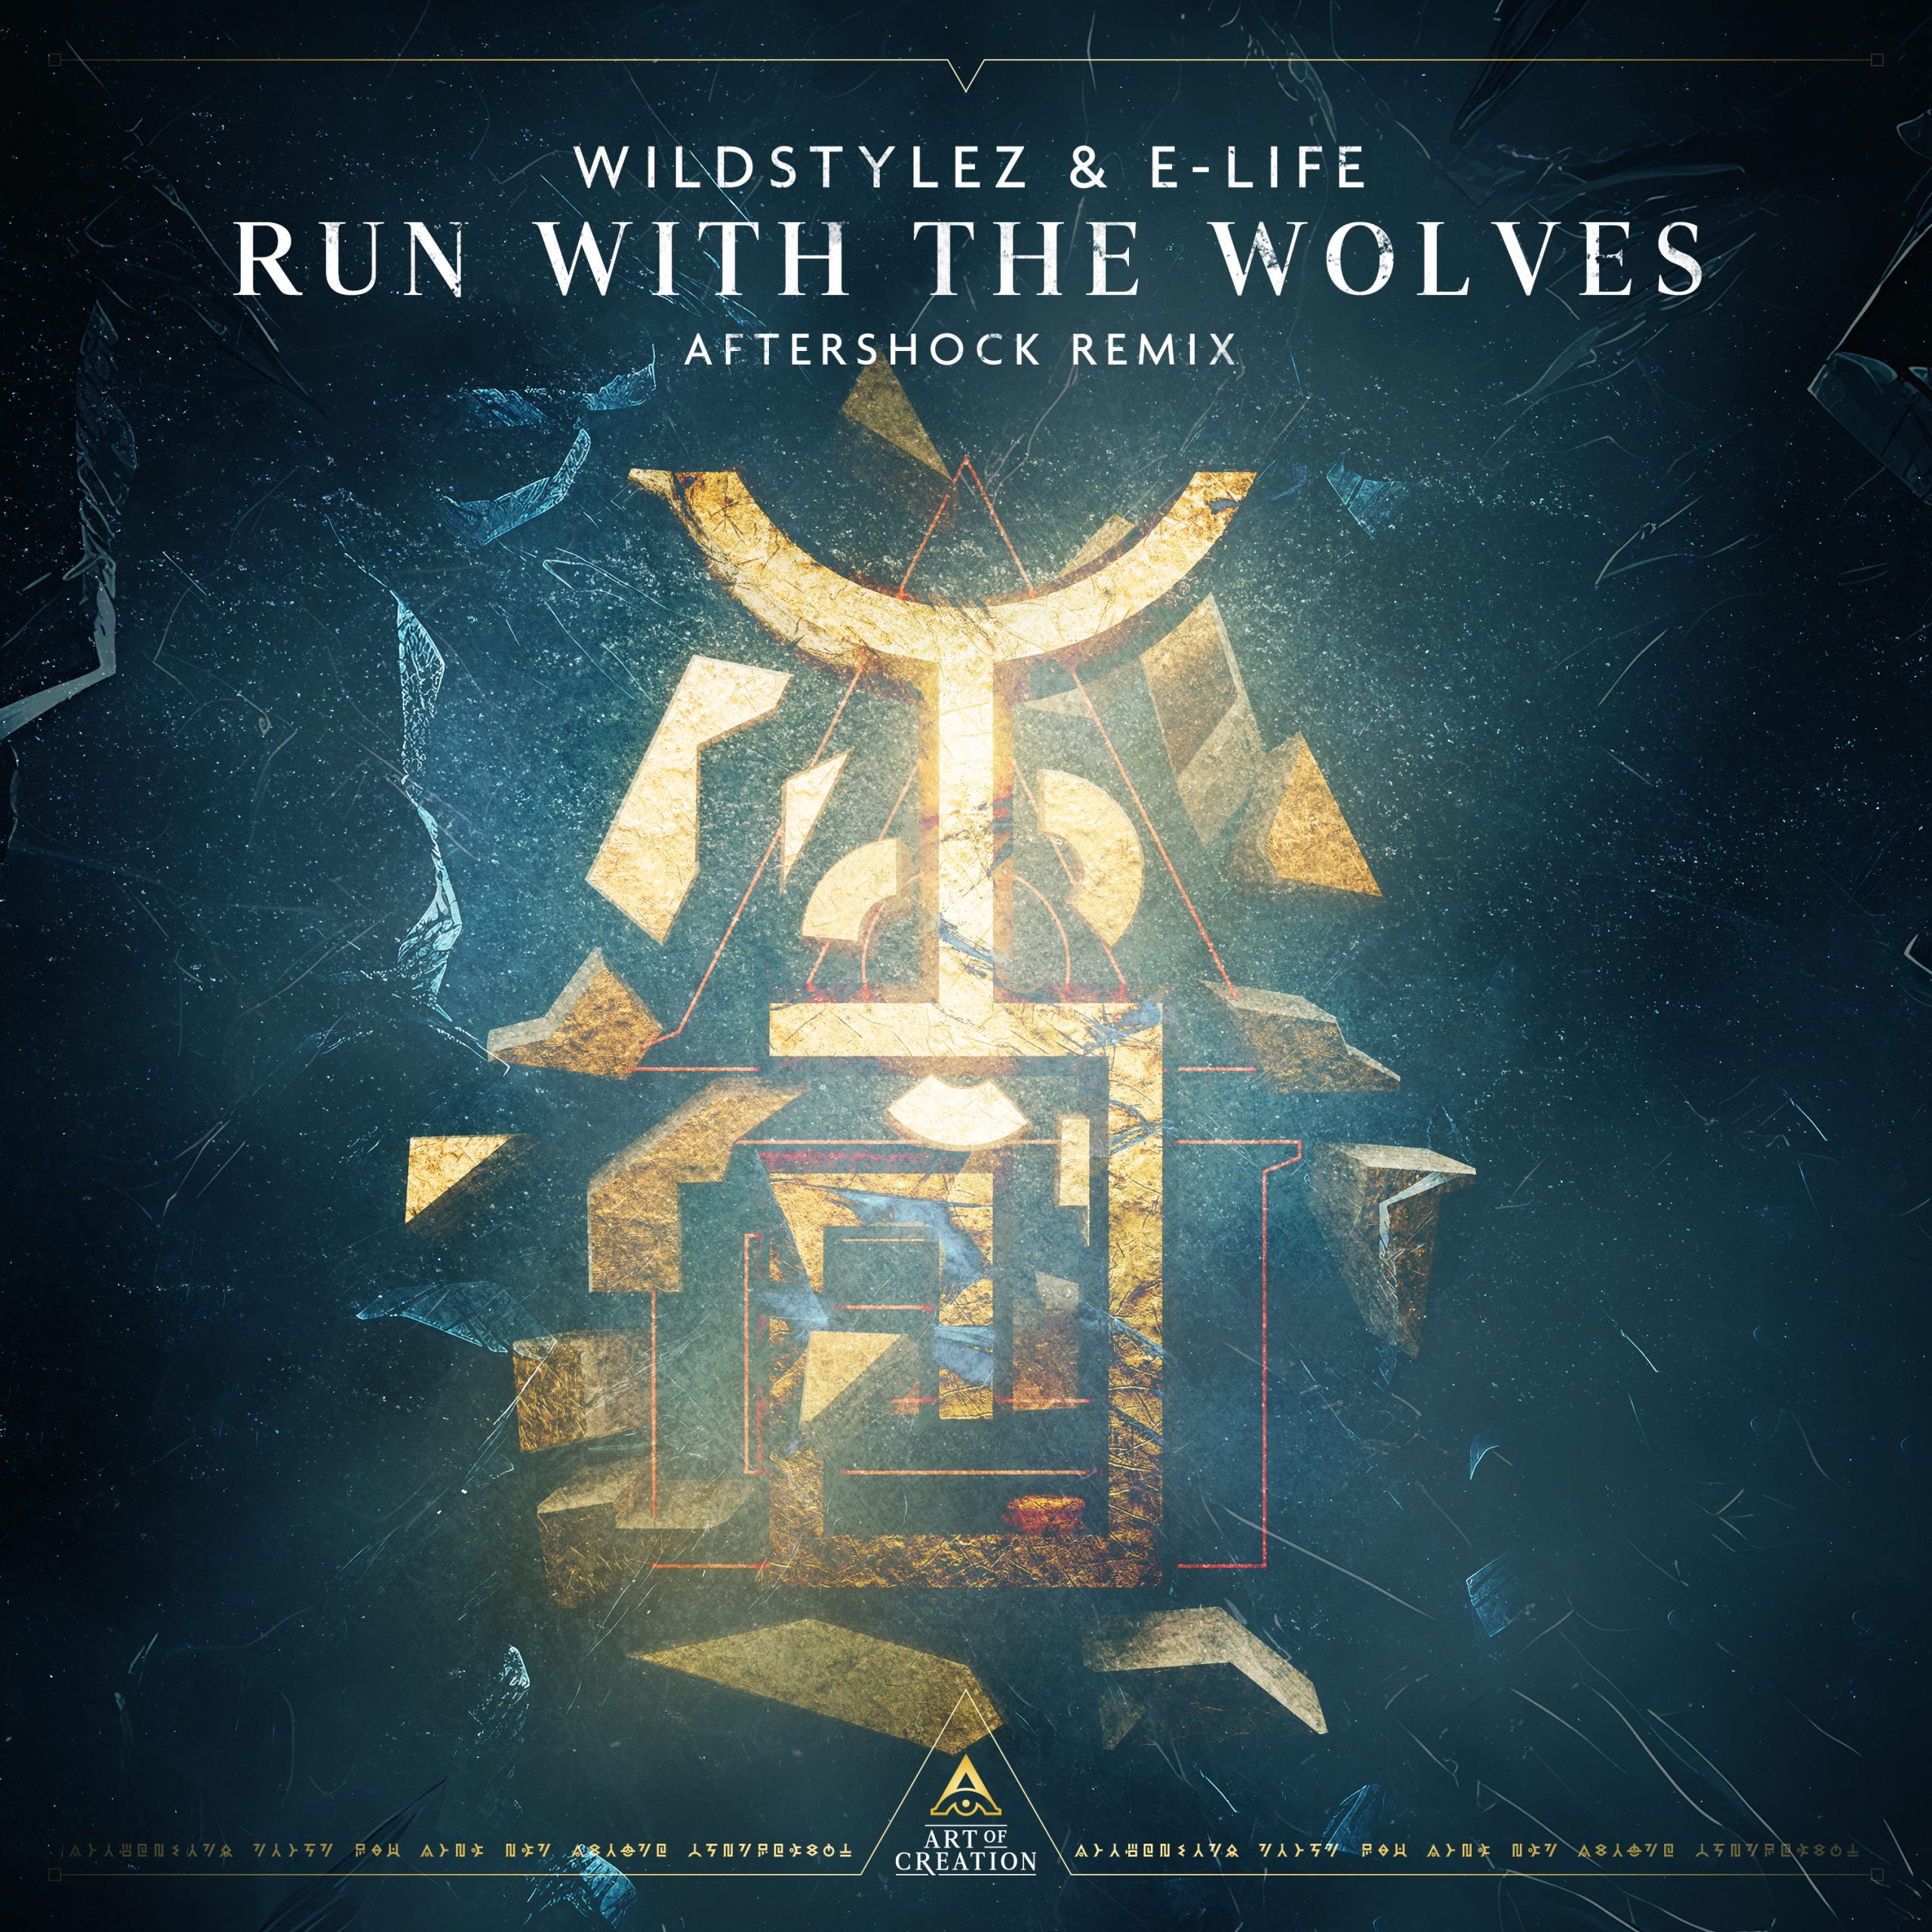 Wildstylez & E-Life - Run With The Wolves (Aftershock remix) coverart